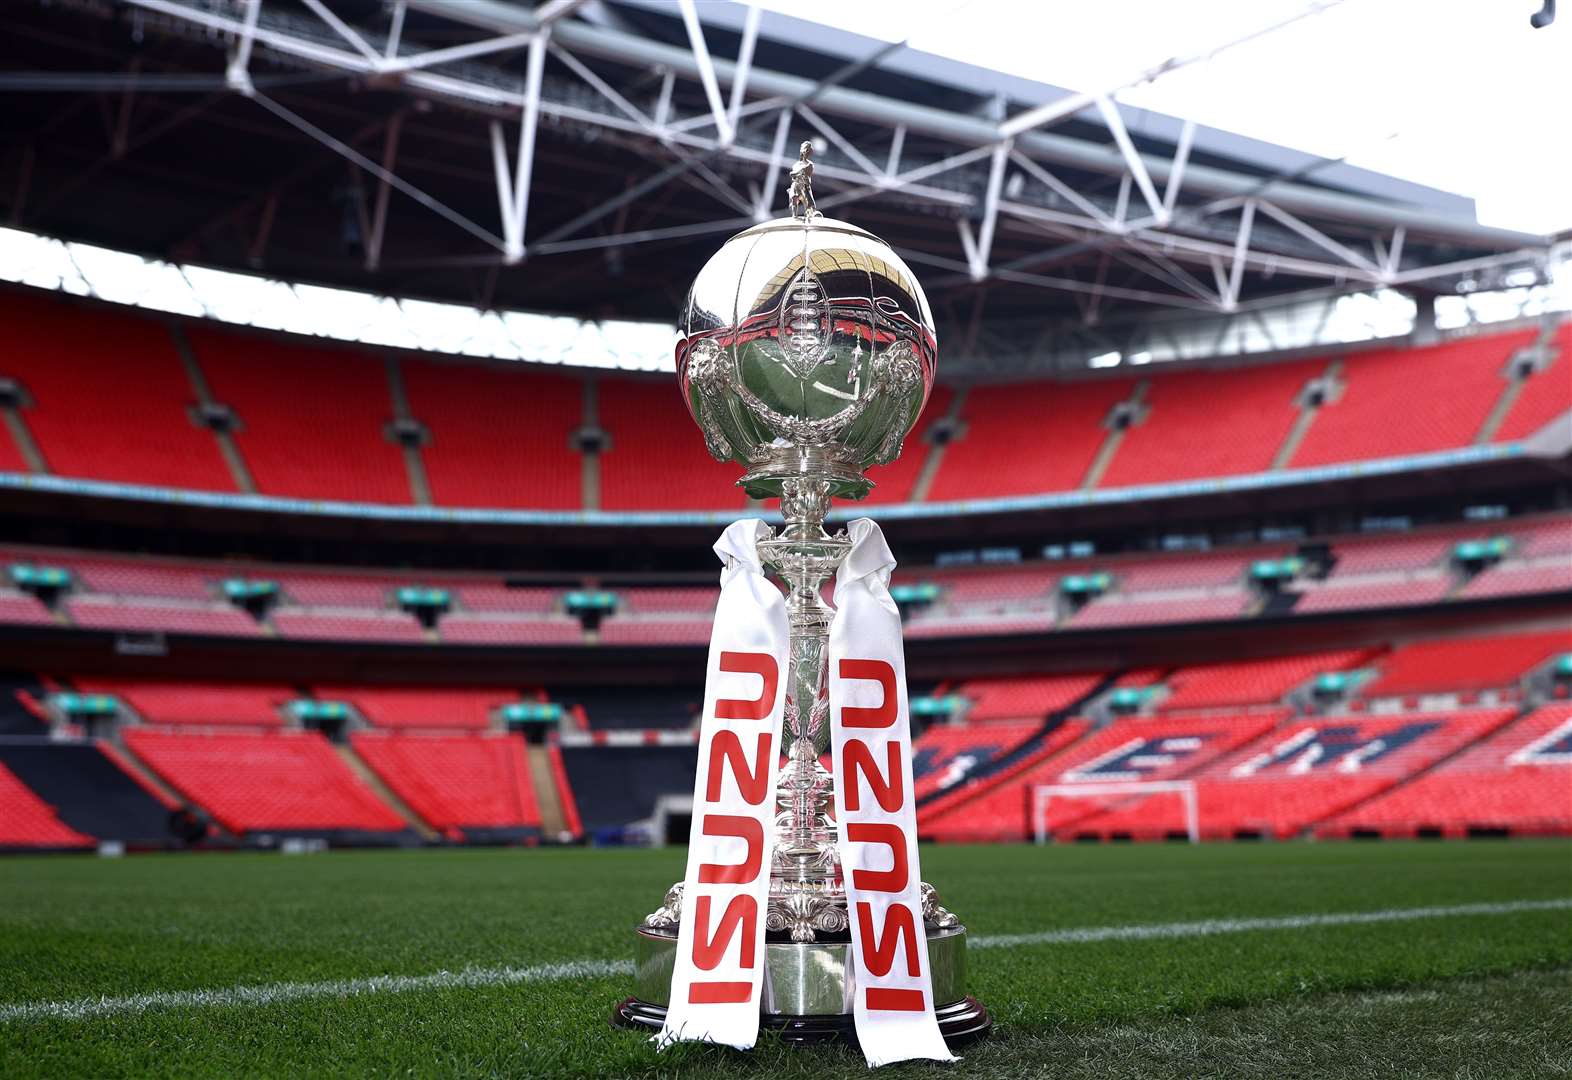 York City Drawn At Home To Altrincham In FA Trophy Quarter-Finals